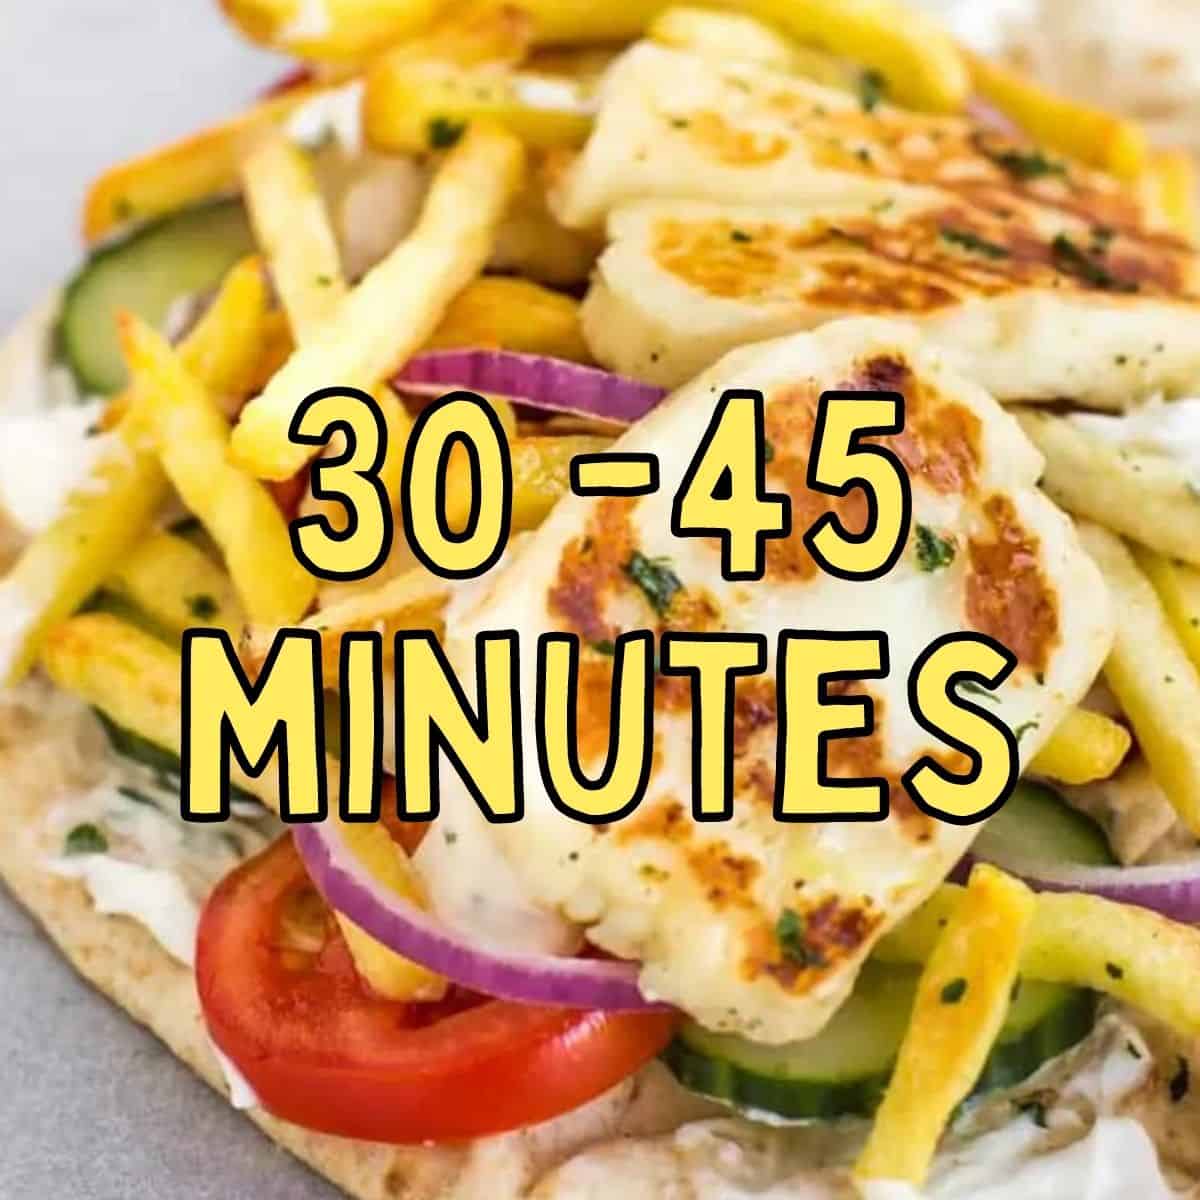 Recipes Cooked in 30-45 Minutes